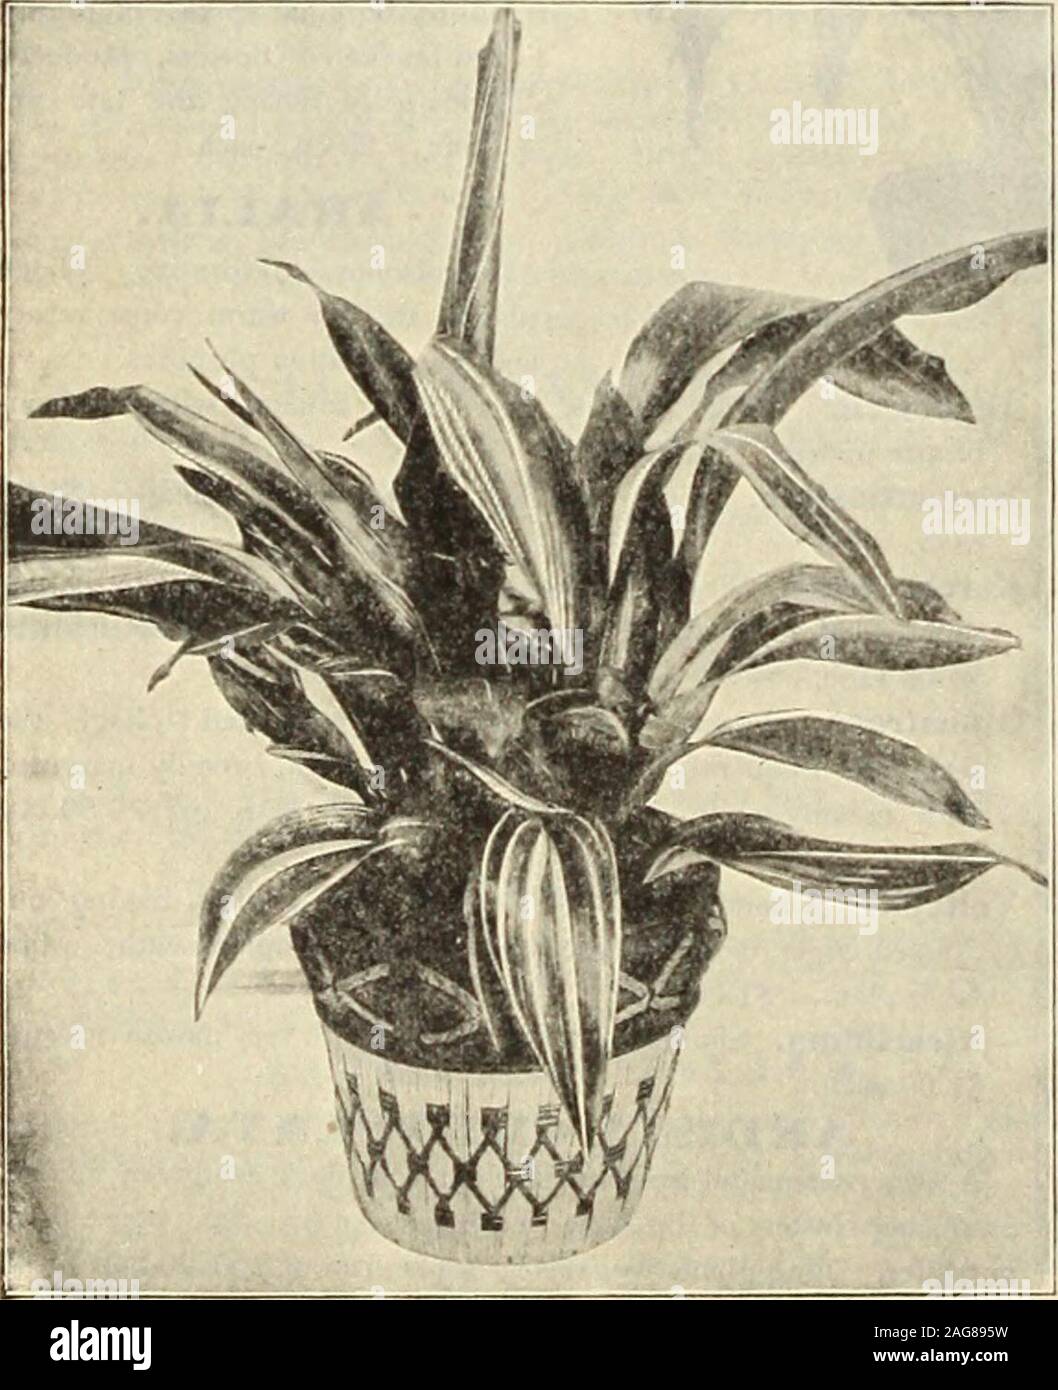 . Dreer's 1913 garden book. Aspidistra Lurida Variegata. AkaUi ahia (Norfolk Island Pine,. ASPARAGUS. Plumosus Nanus (A spar a gv s Fern). If there is abetter plant for table decoration than this we do not knowit. I he foliage is more delicate than that of the finestFern, being lace-like in its filminess. A plant with half adozen stalks is a mass of dainty, misty green, amongwhich the stems of a few flowers can be thrust in such amanner as to make the com! nation far superior, artist-ically, to most expensive decorations prepared for thetable by the professional florist. Its value to the woman Stock Photo